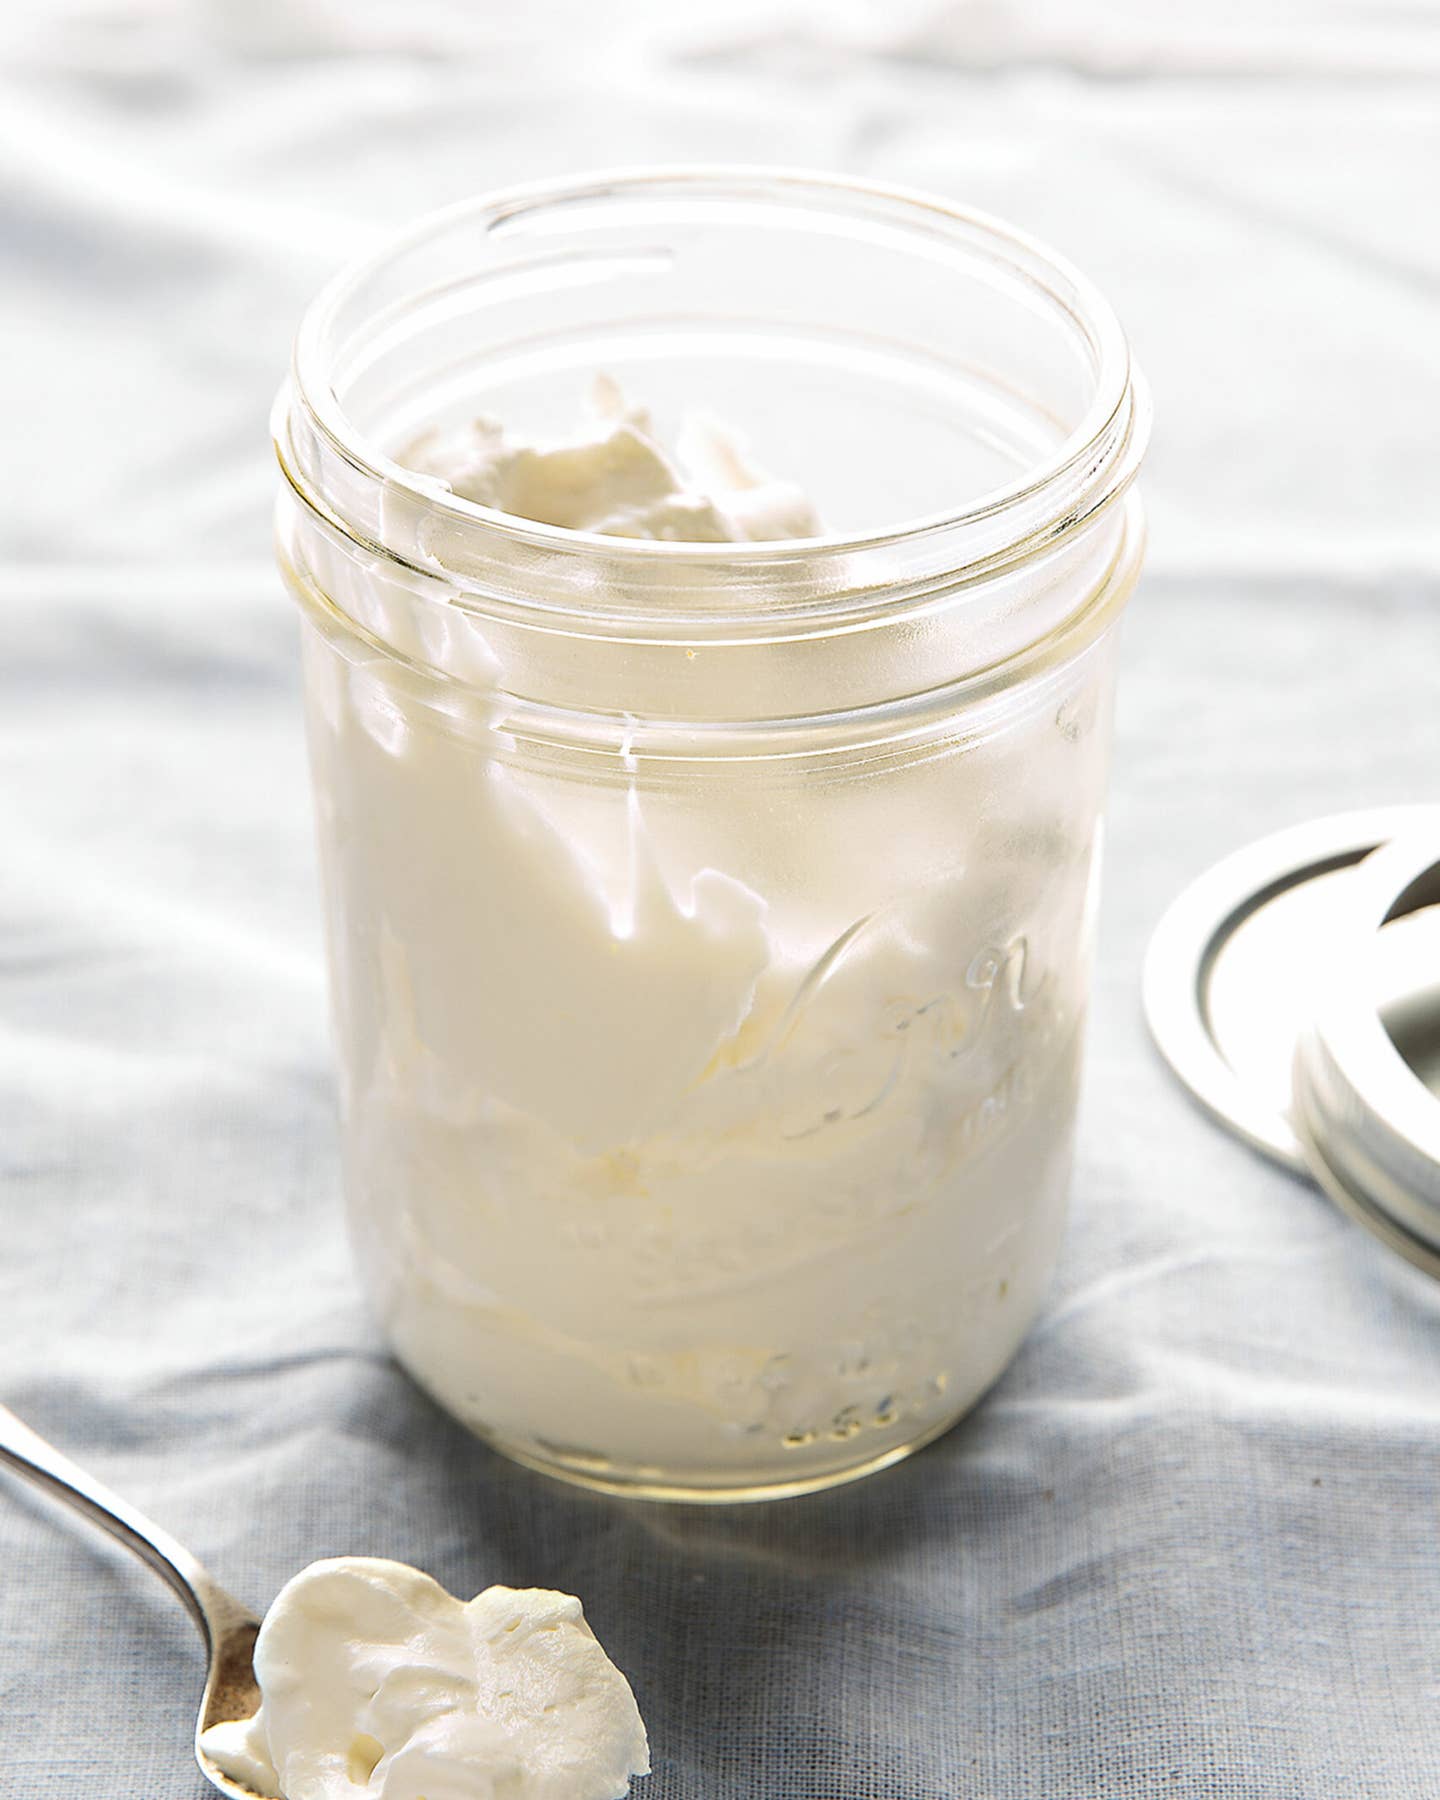 Whipped Cream in a Jar